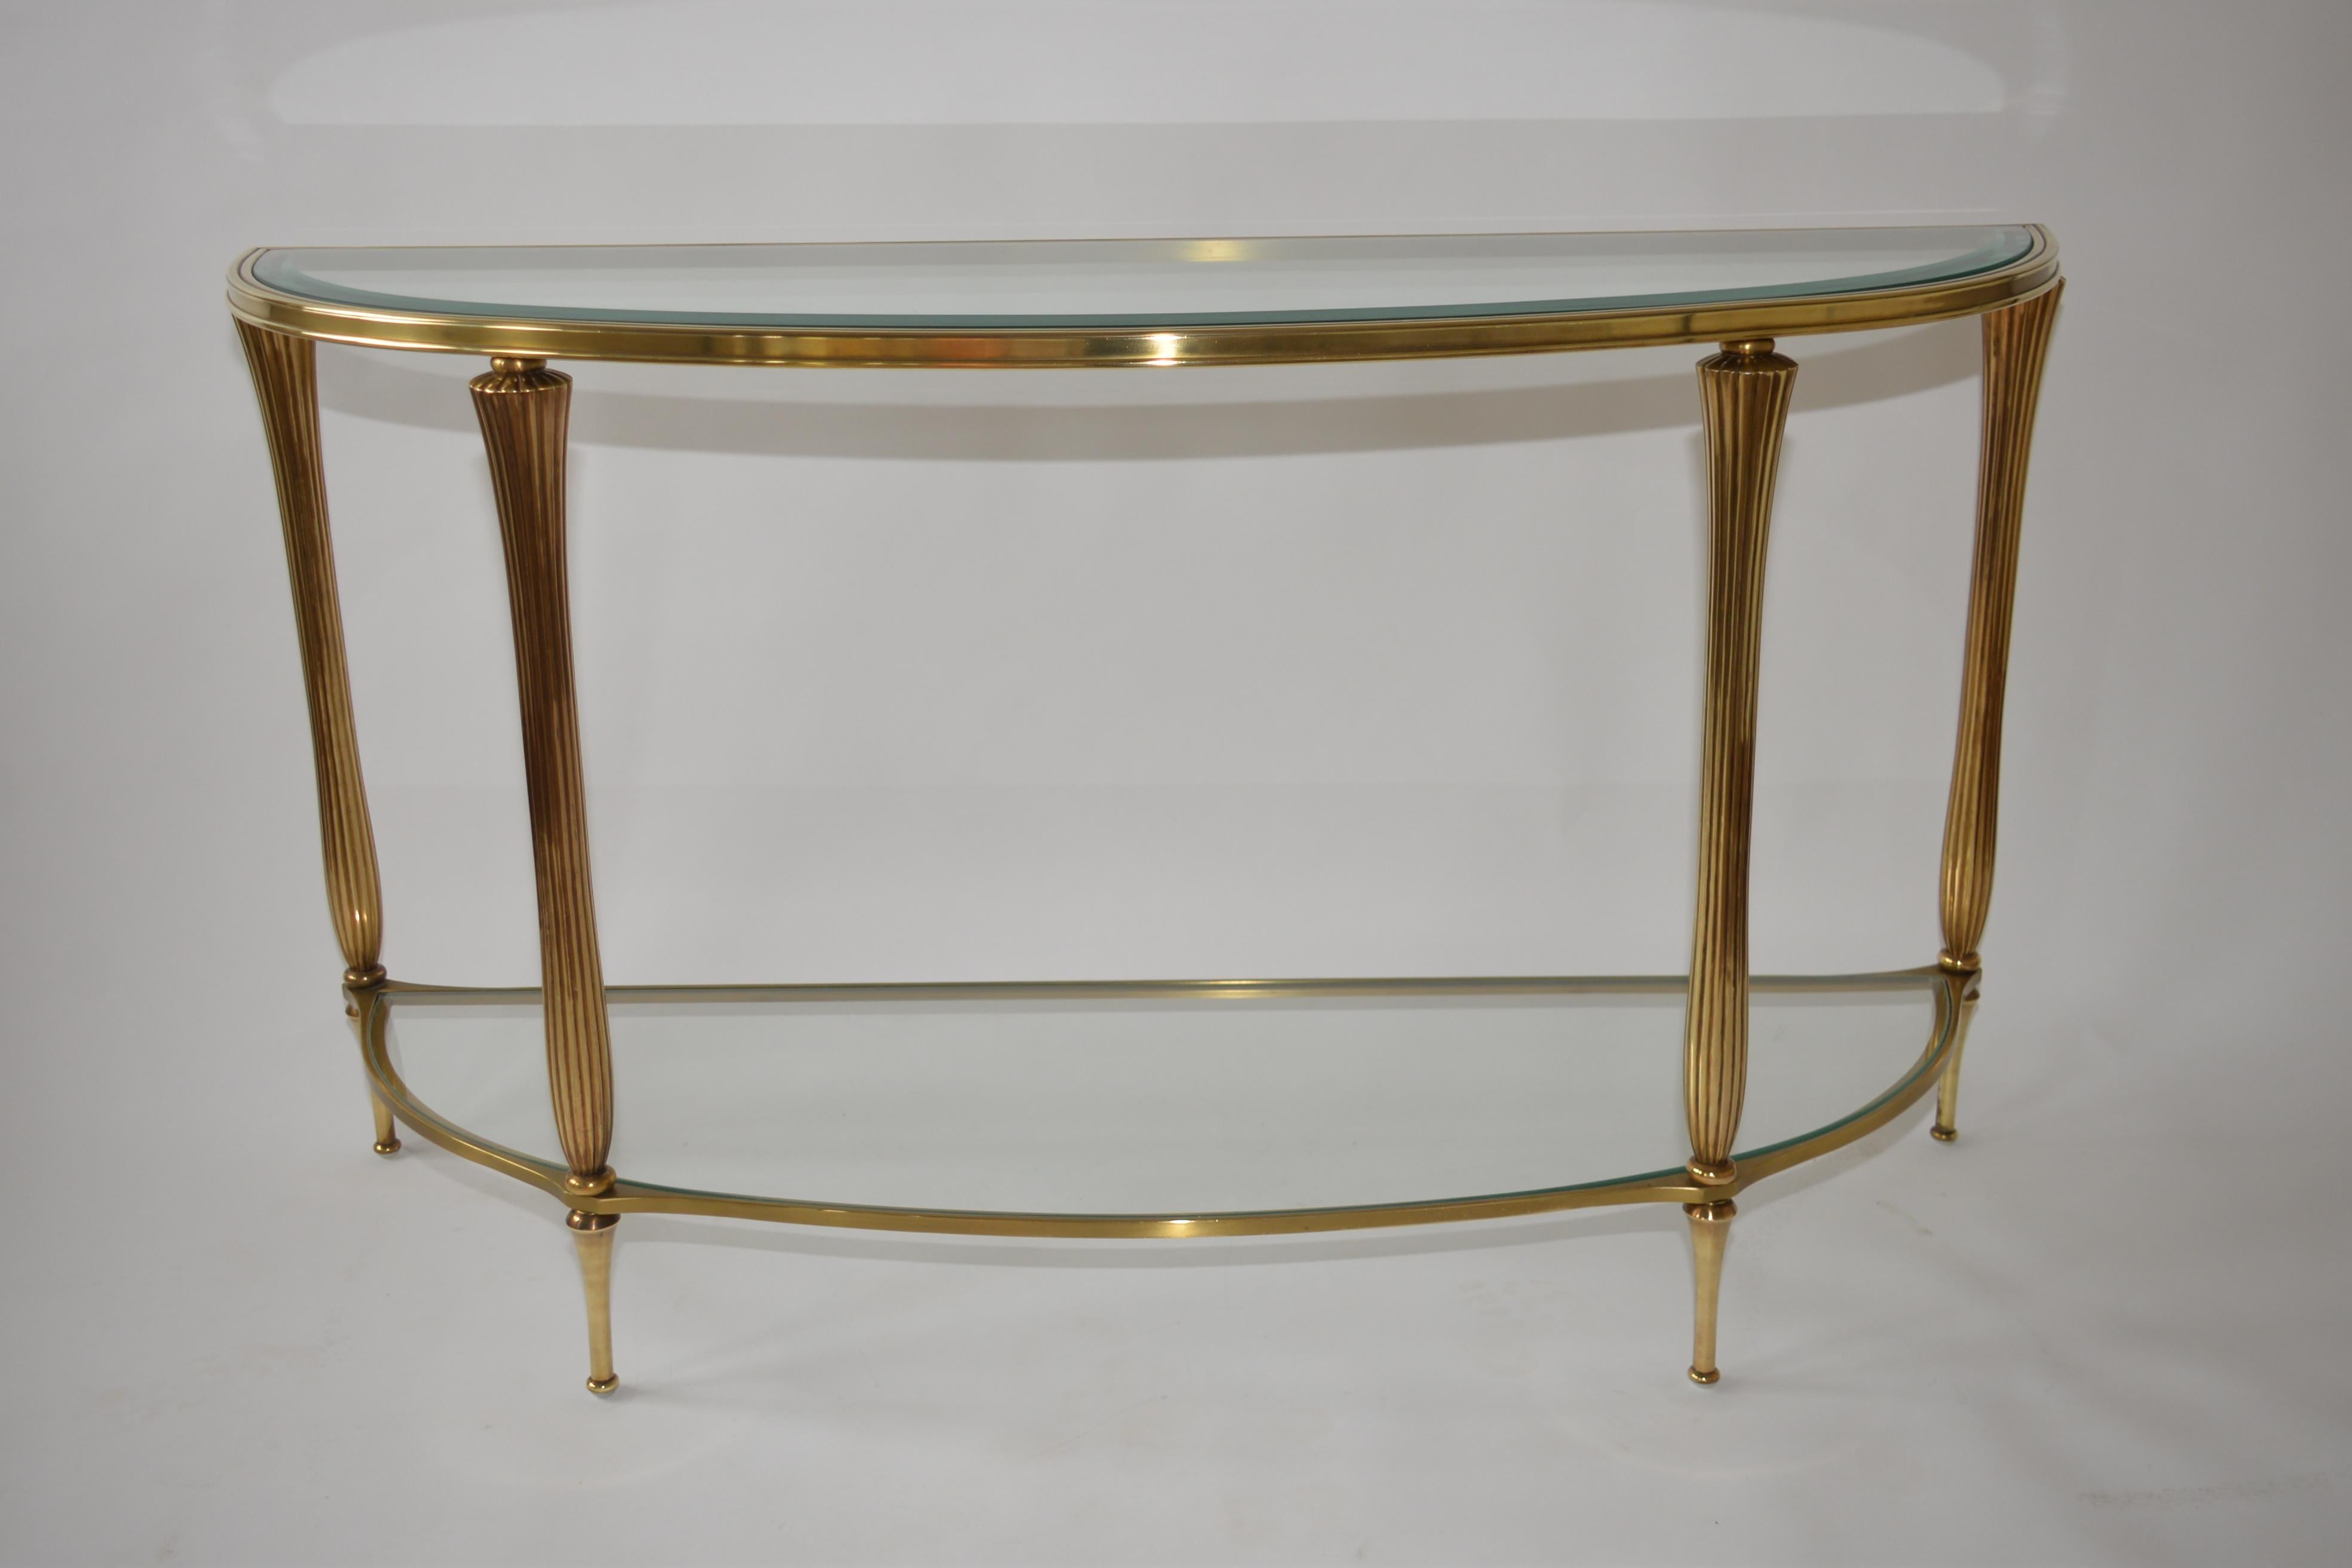 A fabulous Ethan Allan brass and glass half oval console table. A very striking item with two tier glass shelves. In the style of Hollywood Regency and in excellent condition.